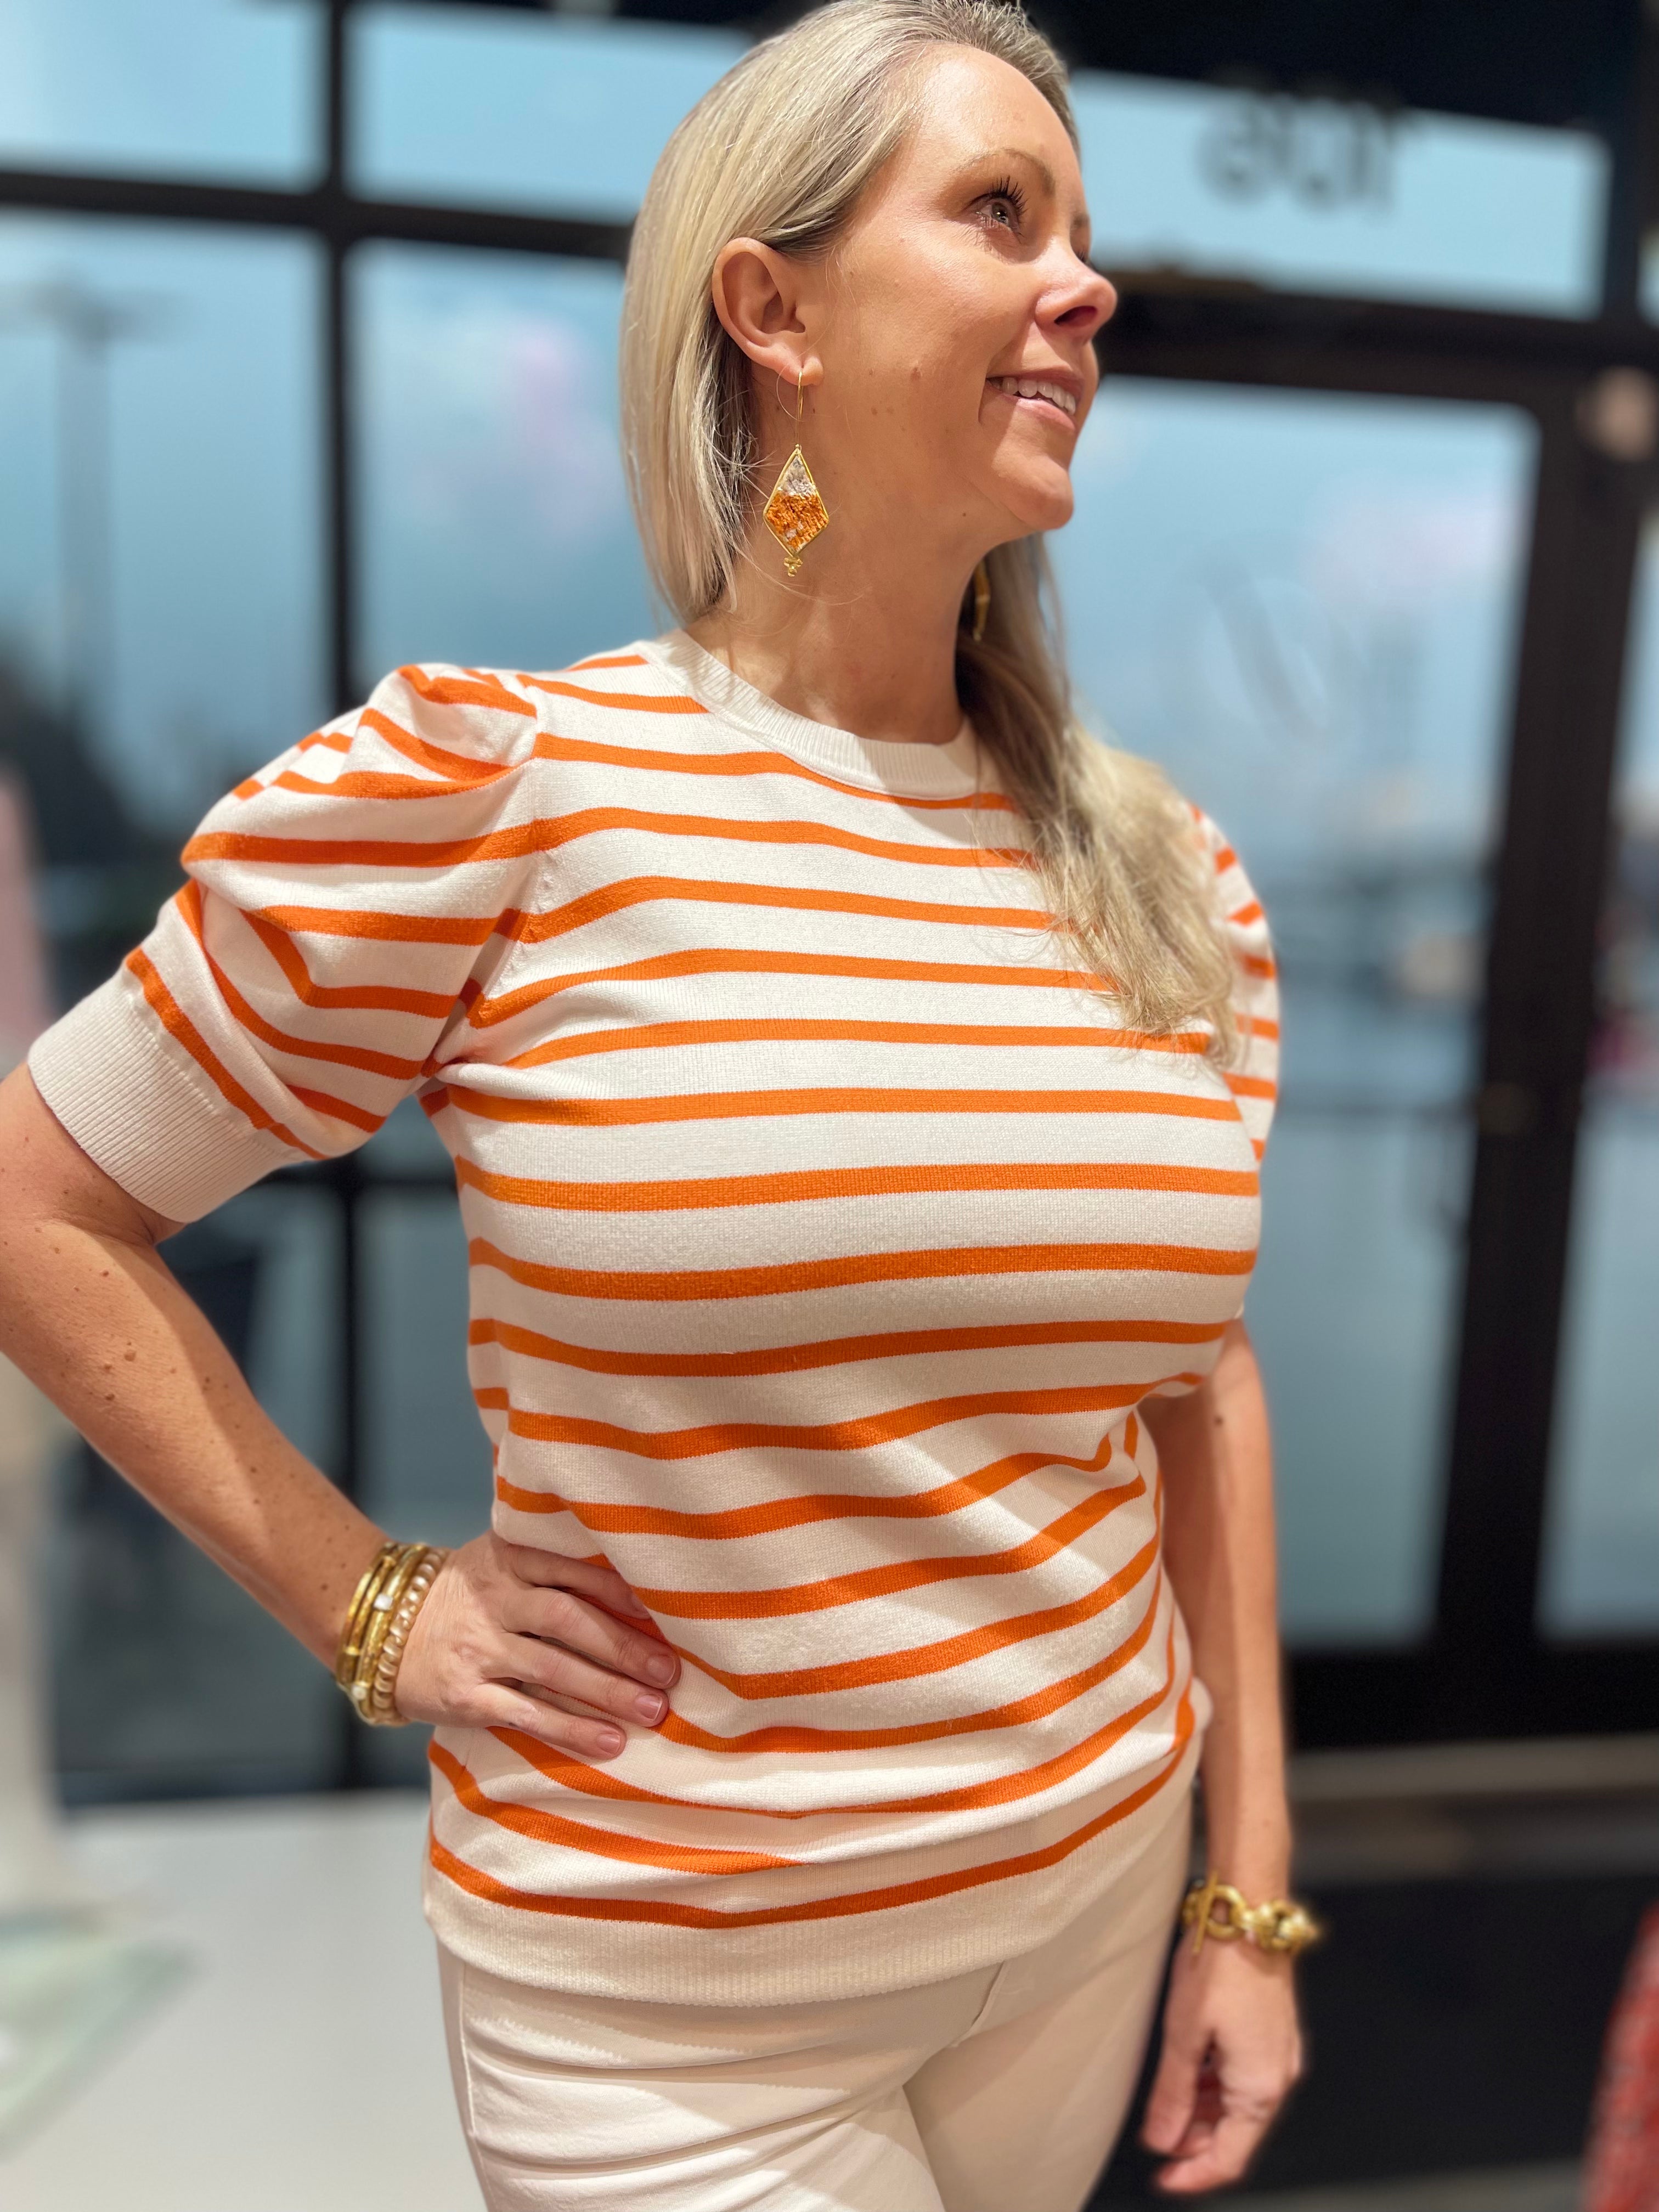 Puff short sleeve sweater top orange and white